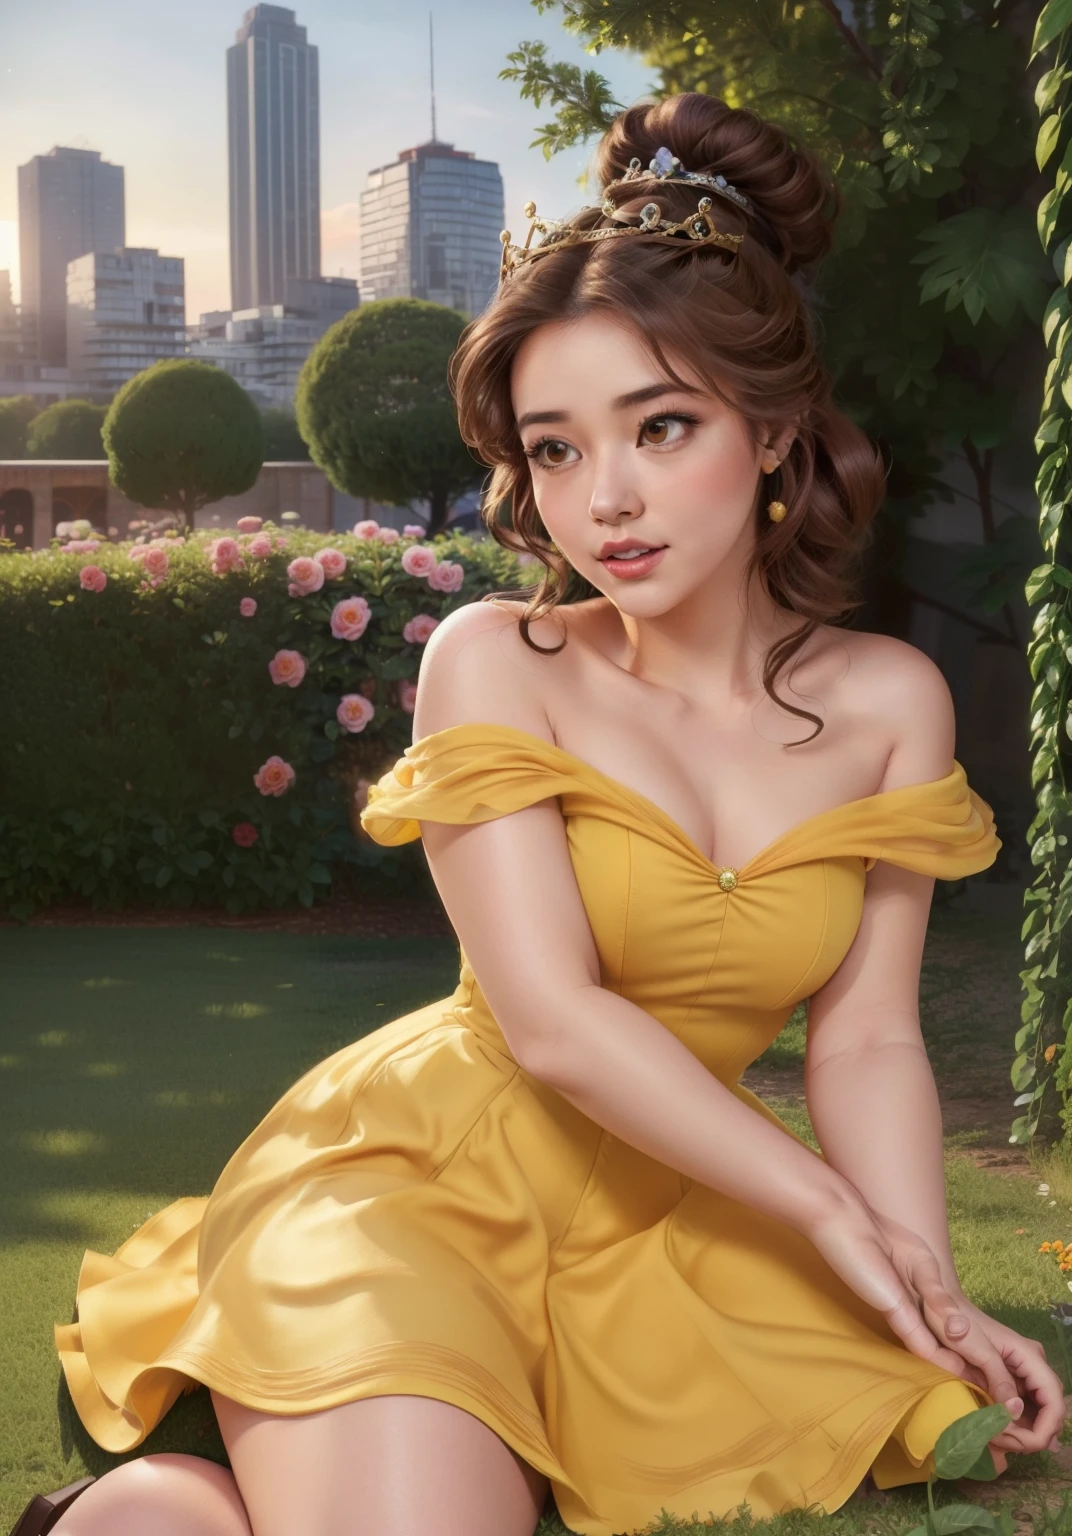 (Belle Waif:1), surprised, cute, cute pose, View Viewer, Thick thighs, (Yellow Dress:1.2), (Hair Bun, tiara) :d, Curvy, (Holding a red rose:1),

(Realistic:1.2), (realism), (masterpiece:1.2), (highest quality), (Super detailed), (8k, 4K, Complex),(Full Body Shot:1),(Cowboy Shot:1.2), (85mm),Particles of light, Lighting, (Very detailed:1.2),(Detailed face:1.2), (Gradation), SFW, colorful,(Fine grain:1.2),

(Detailed landscape, garden, plant, city:1.2),(Detailed Background),Detailed landscape, (Dynamic Angle:1.2), (Dynamic pose:1.2), (The rule of thirds_composition:1.3), (Course of action:1.2), Wide Shot, Dawn, alone,

